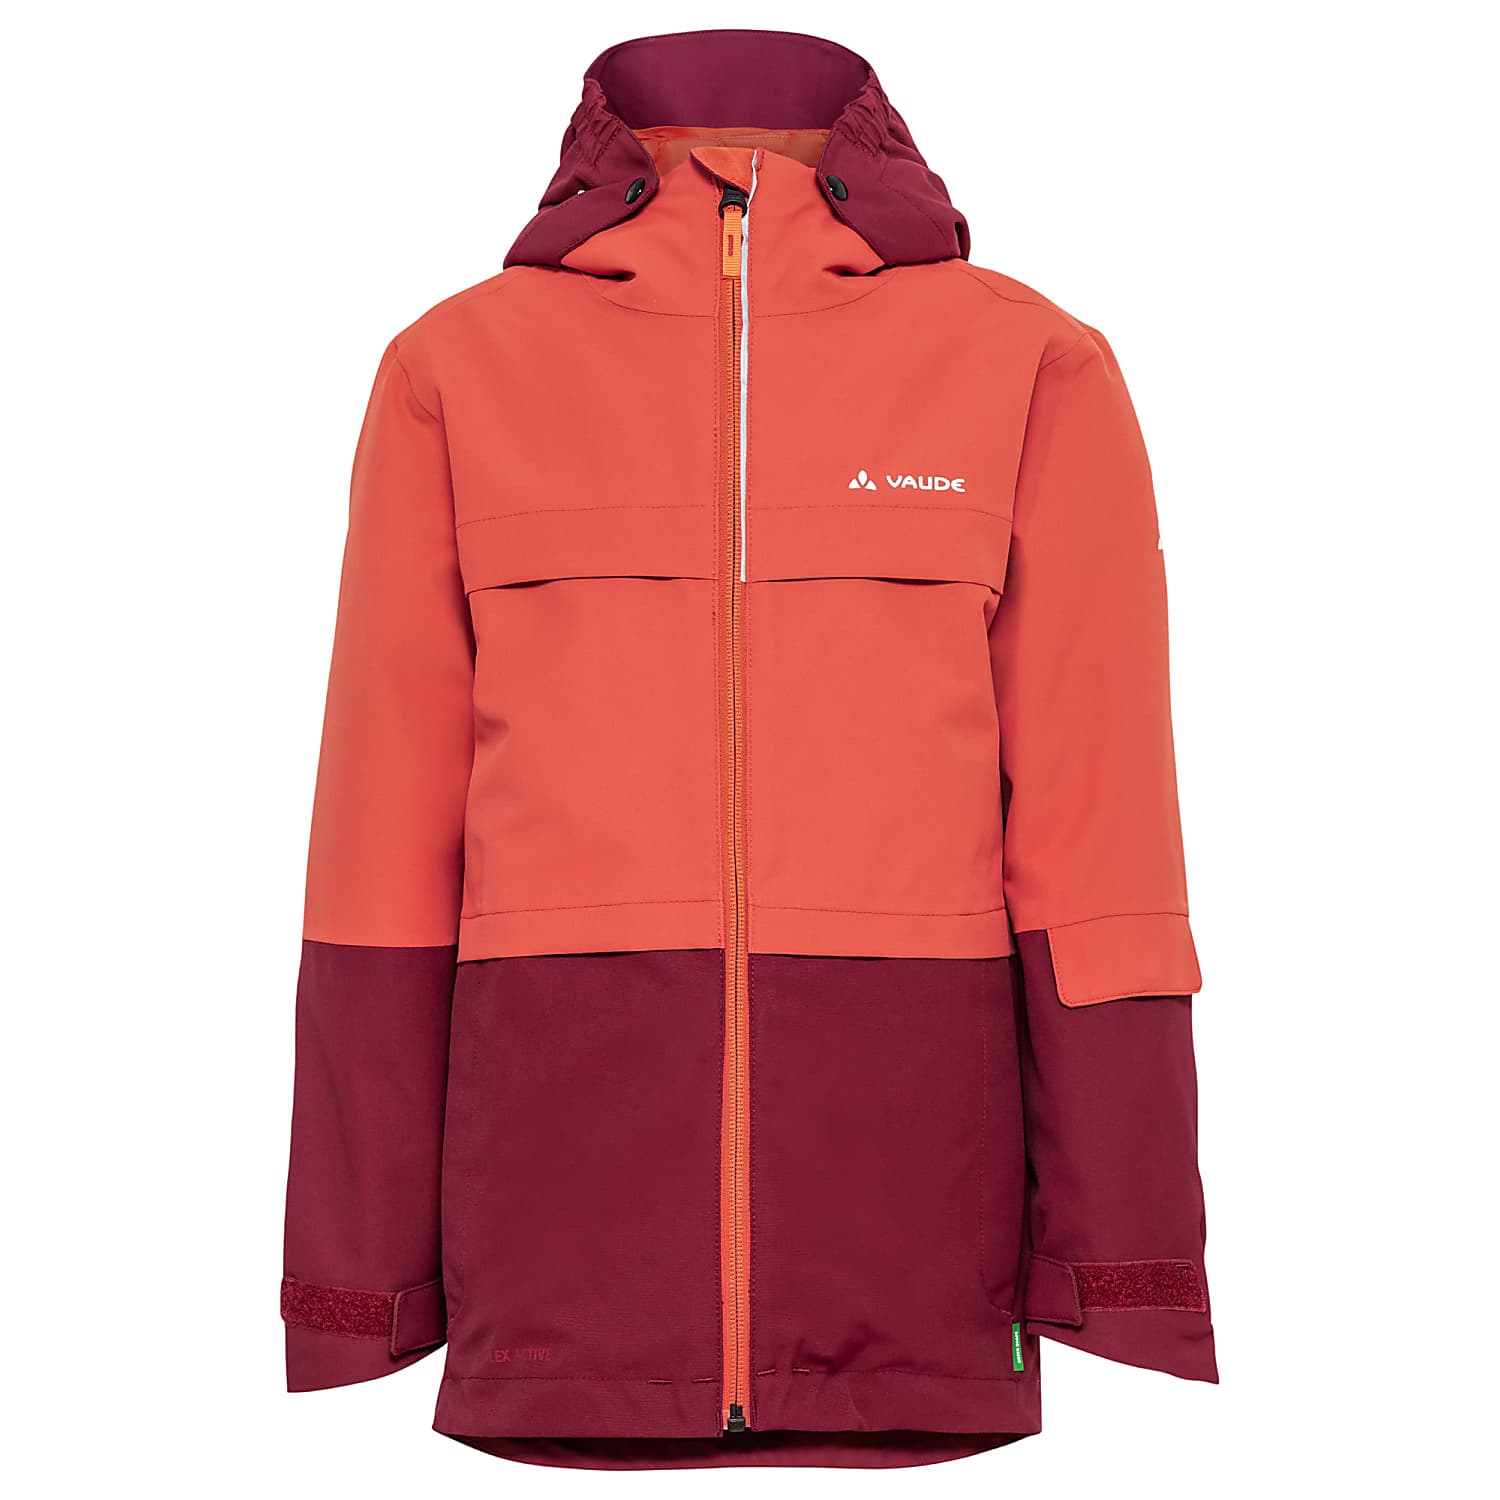 Vaude KIDS SNOW CUP 60£ Hot Shipping Chili - Free at 3IN1 II, JACKET starts